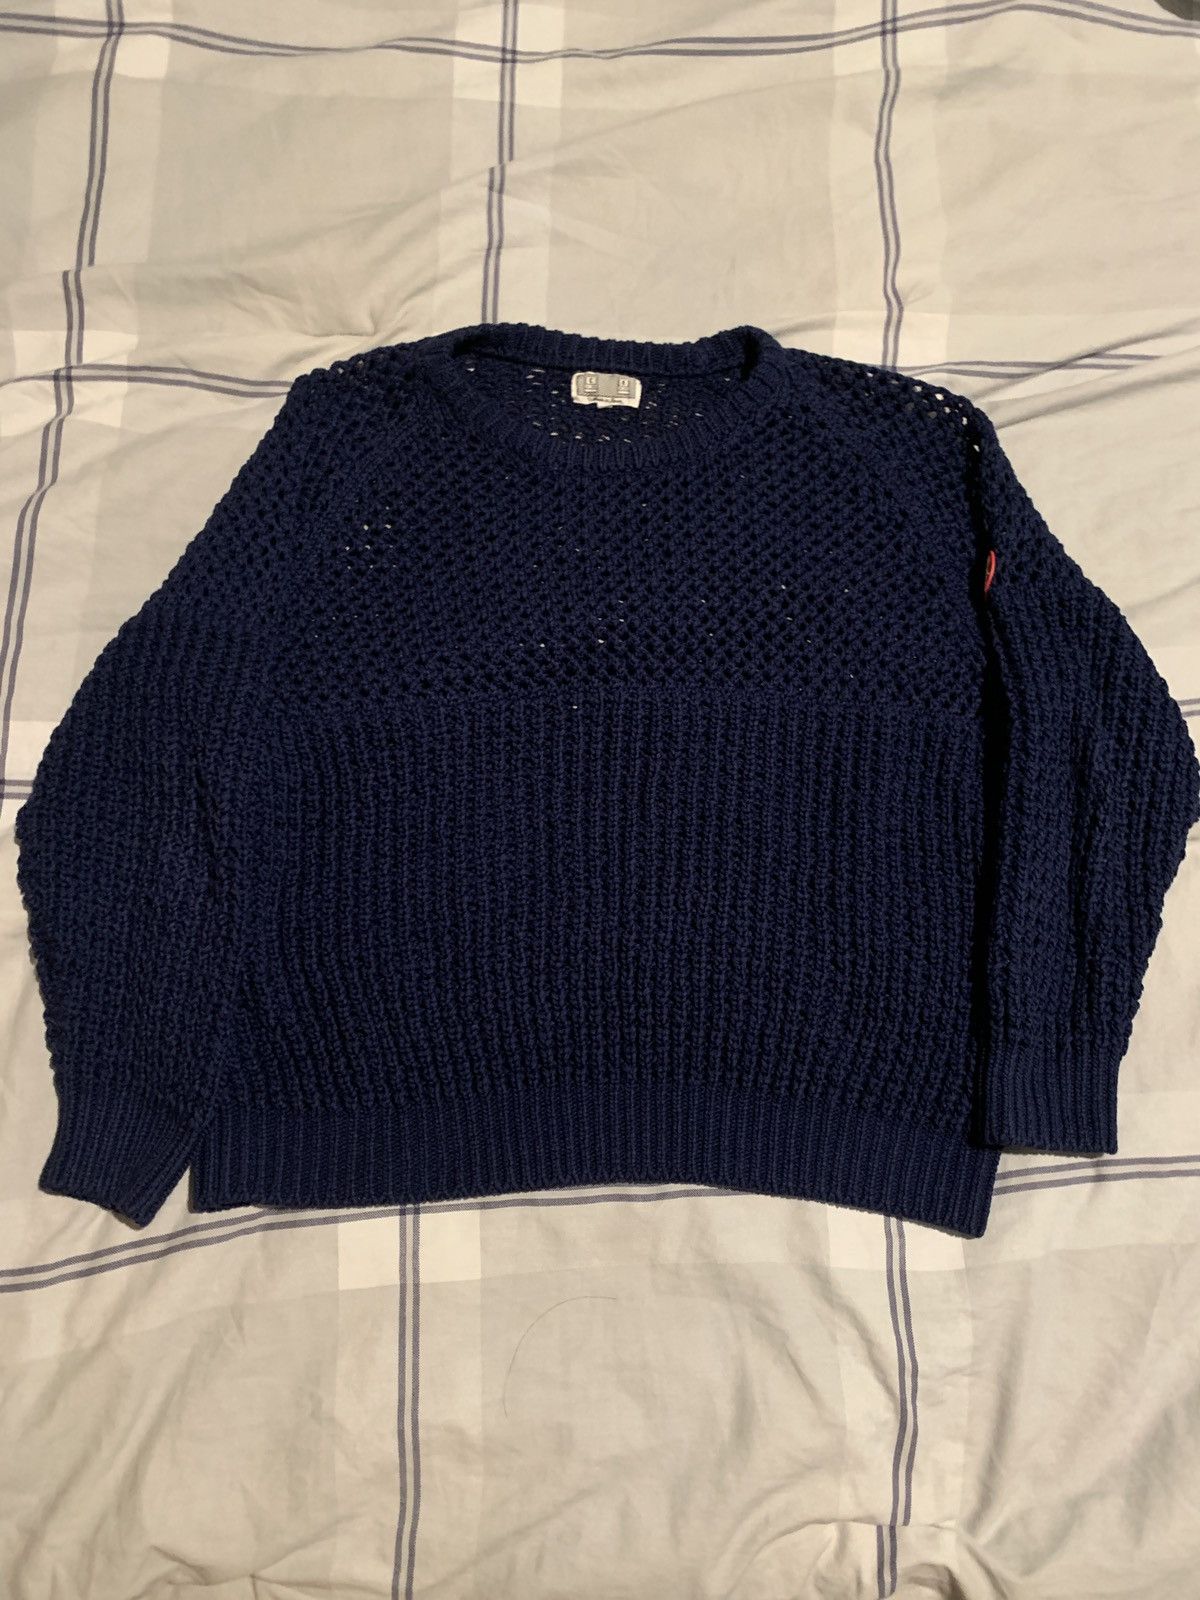 Cav Empt M Cav Empt Thermal Waffle Knit Sweater | Grailed